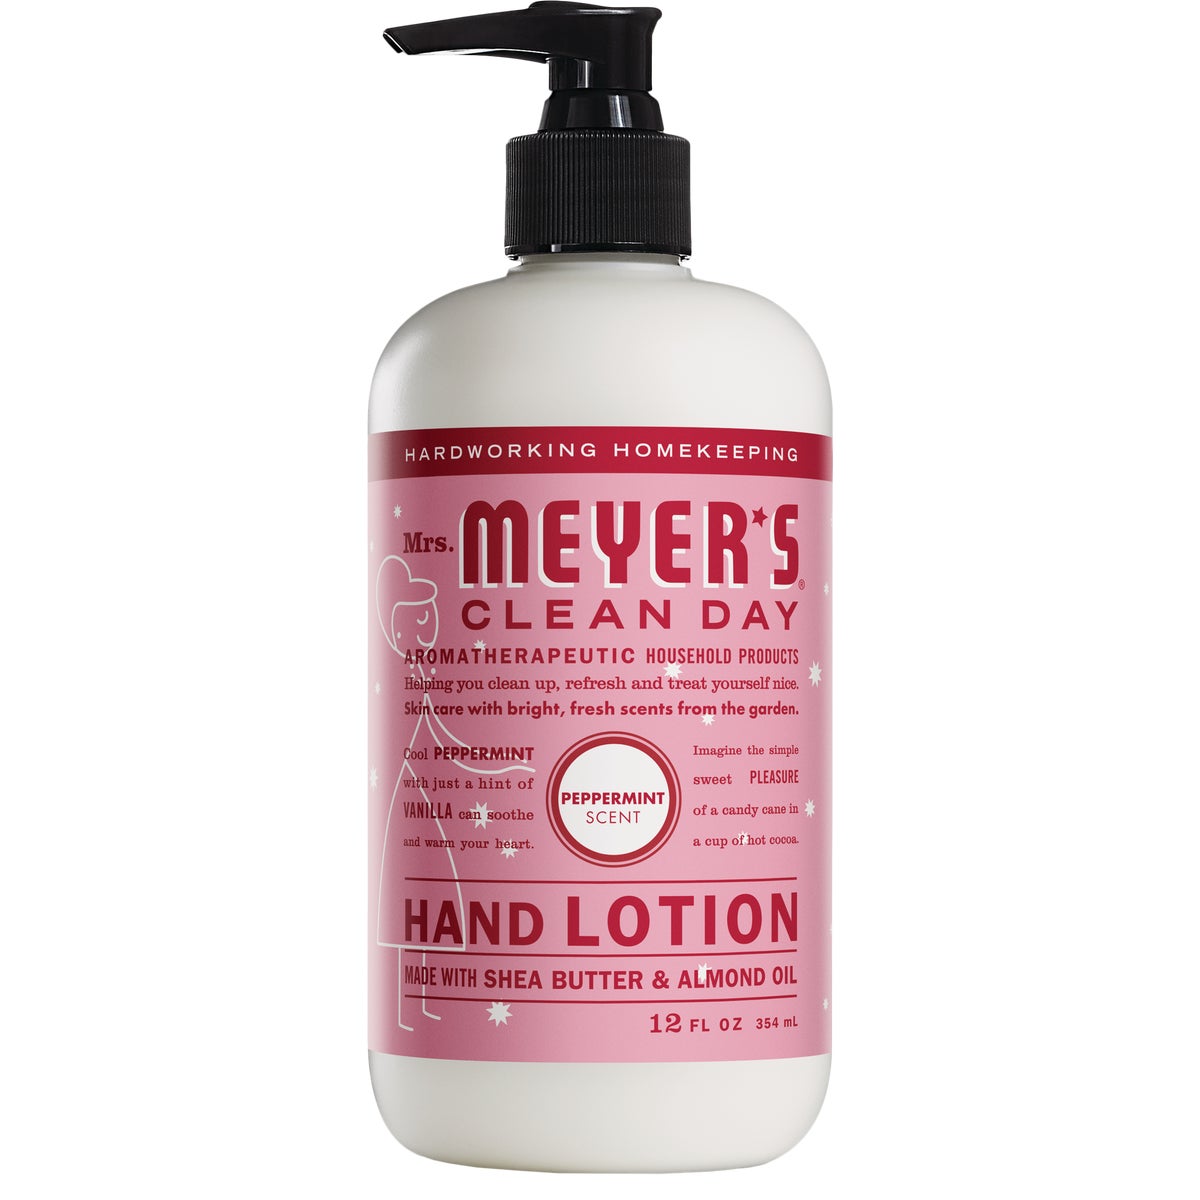 Mrs. Meyer's Clean Day 12 Oz. Peppermint Hand Lotion